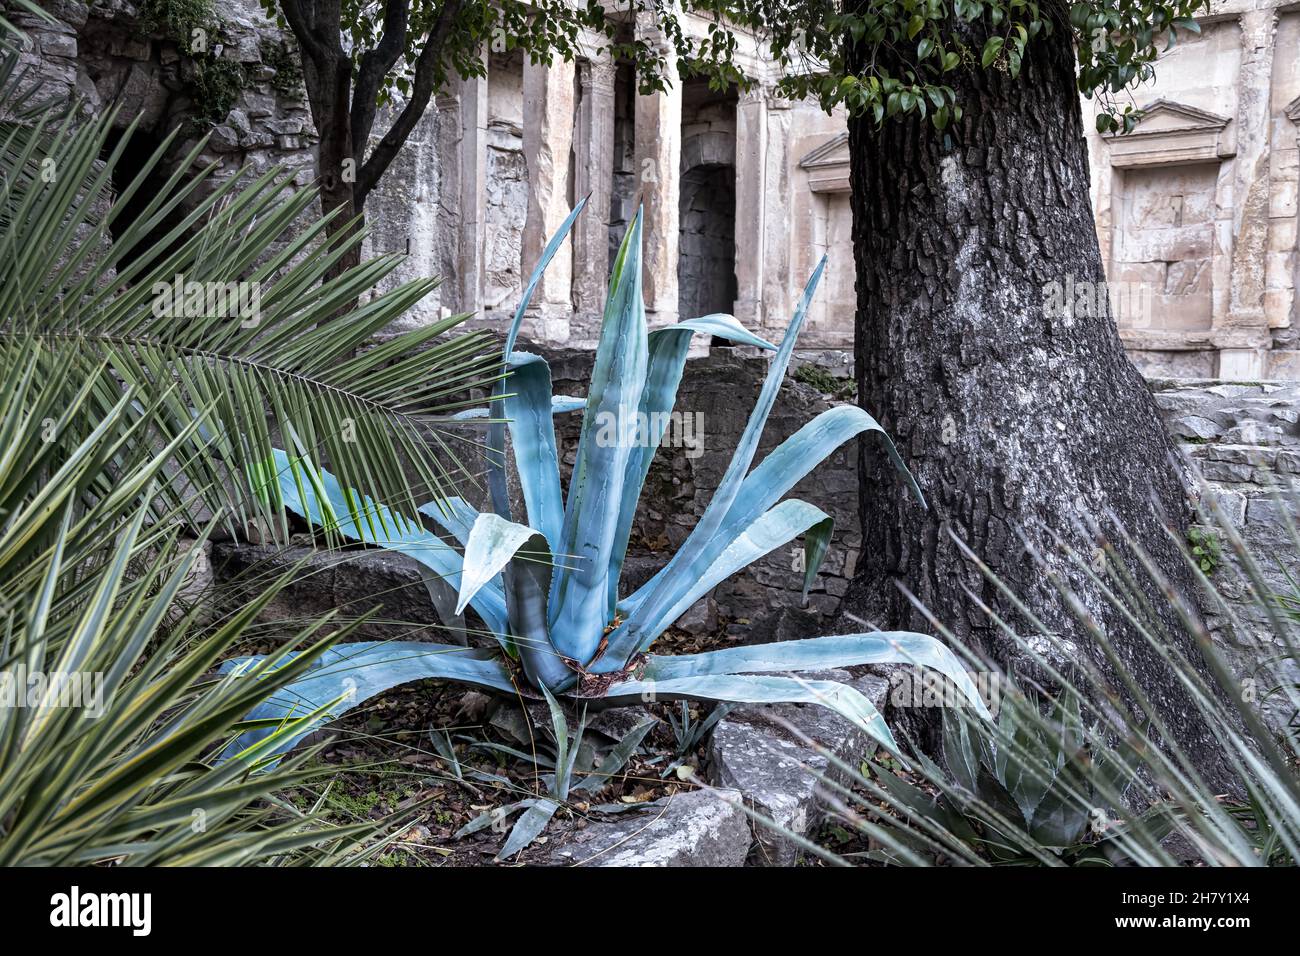 Beautiful blueish agave in the Jardins de la fontaine (Gardens of the Fountain), Nîmes, South of France Stock Photo